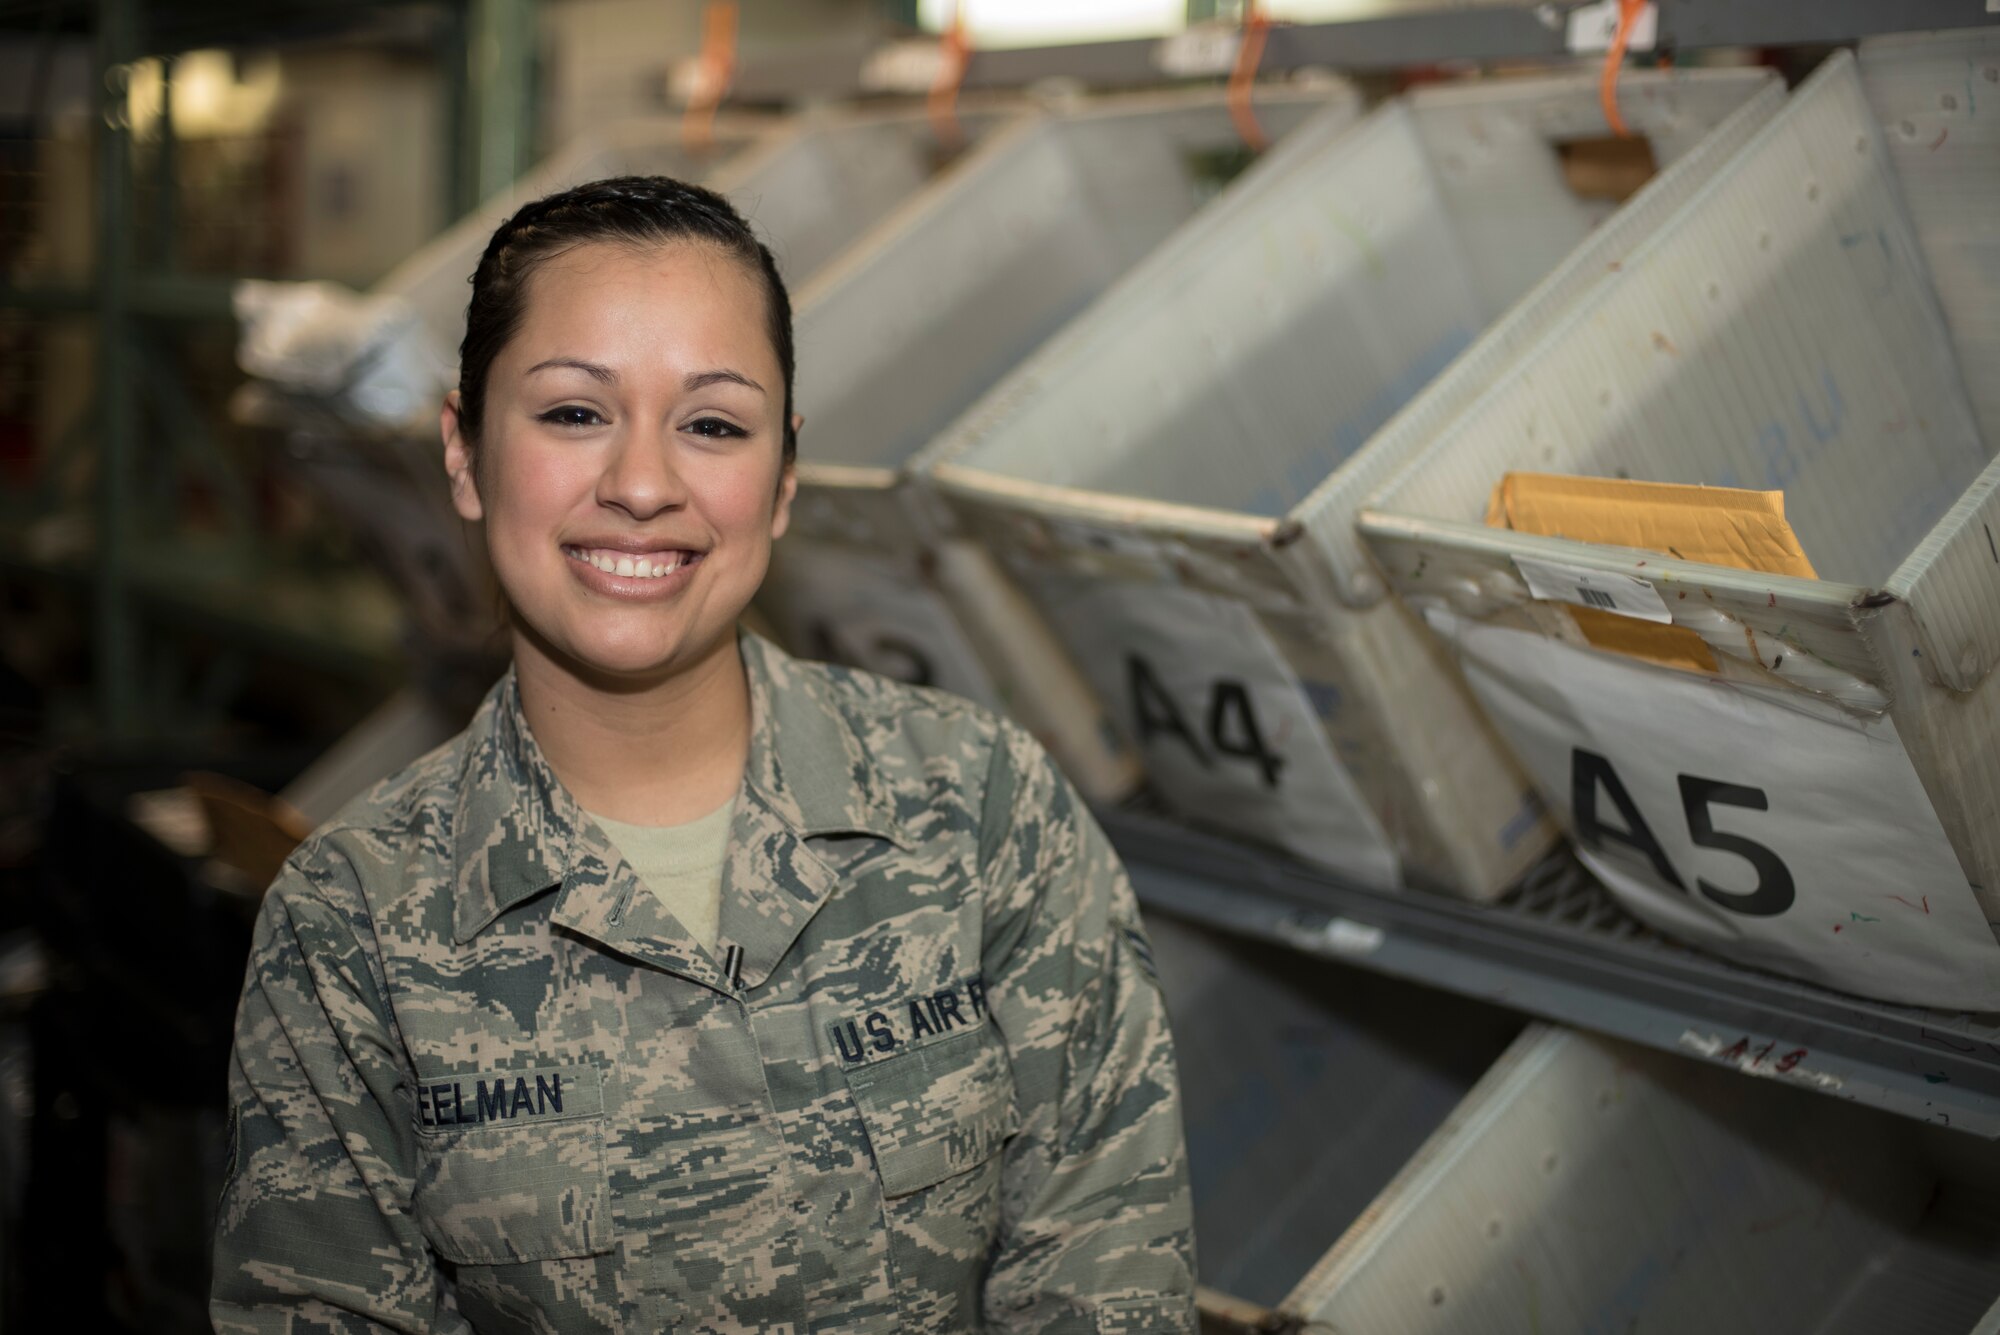 U.S. Air Force Senior Airman Maria Steelman, a postal clerk with the 35th Communications Squadron, poses for a picture at Misawa Air Base, Japan, Jan. 27, 2016. Steelman was chosen for Wild Weasel of the Week based on superior performance, outstanding work ethic and overall good conduct and discipline. (U.S. Air Force photo by U.S. Air Force photo by Senior Airman Brittany A. Chase)